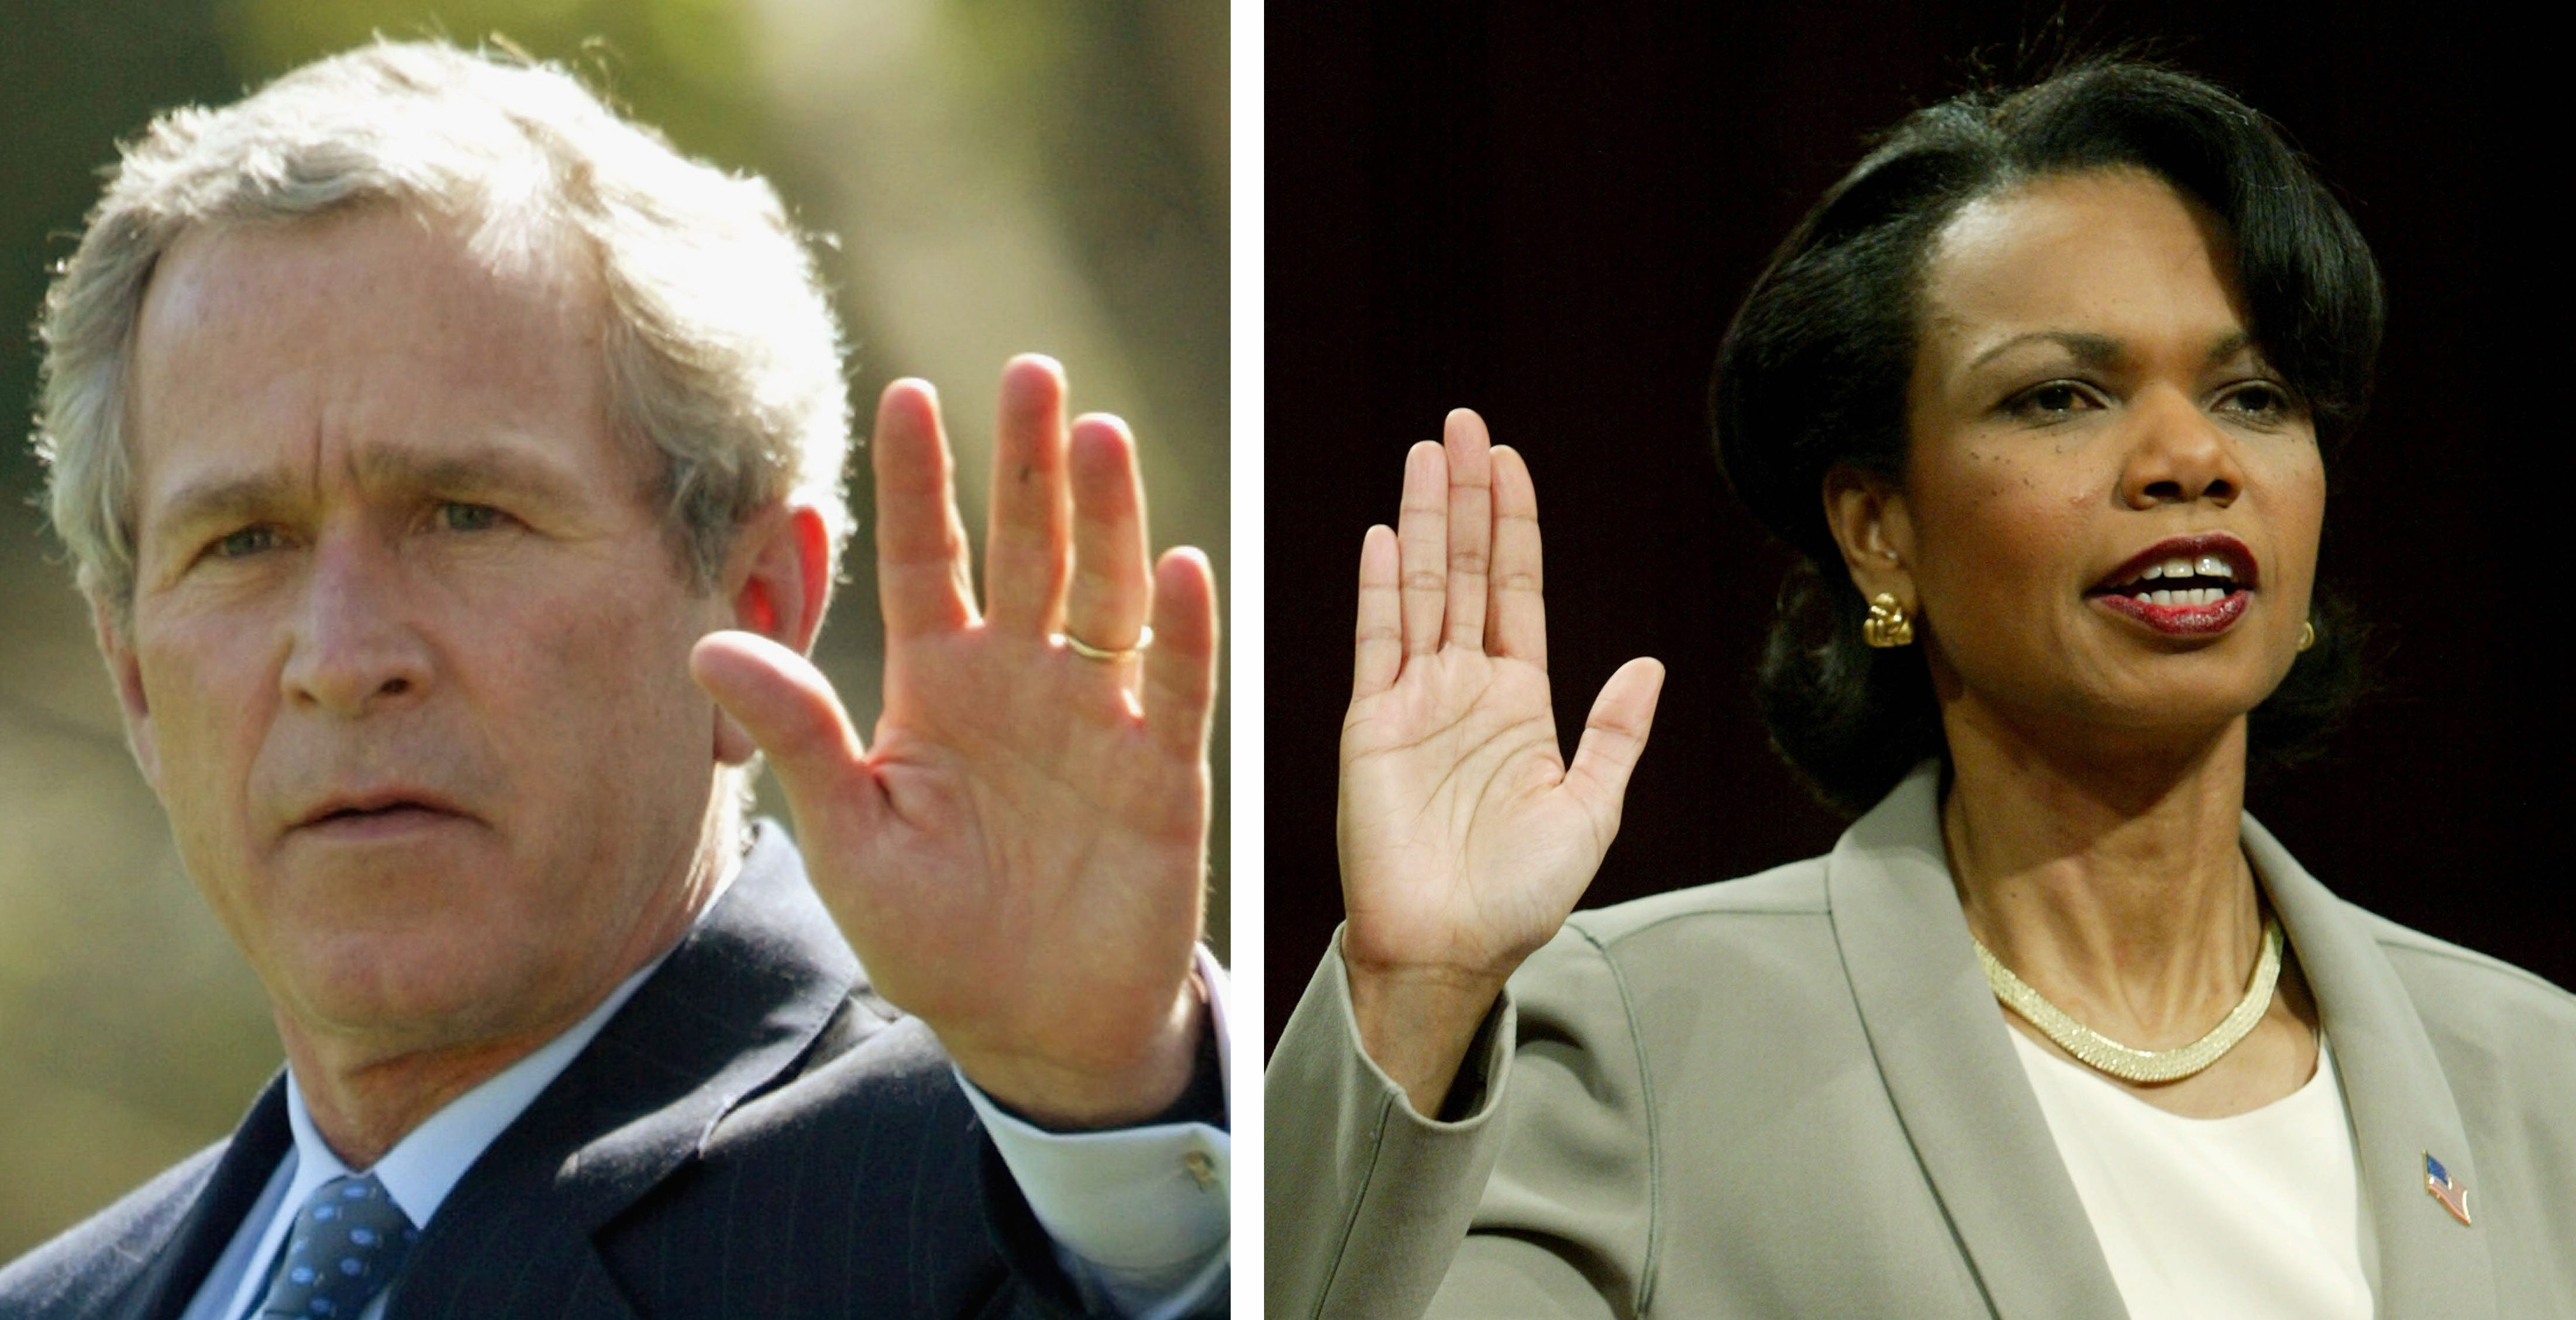 (FILE PHOTO) In this composite image a comparison has been made between former US President George W. Bush and his serving Secretary of State Condoleezza Rice. ***LEFT IMAGE*** WASHINGTON - APRIL 16: U.S. President George W. Bush waves as he walks towards Marine One April 16, 2004 at the South Lawn of the White House in Washington, DC. Bush will spend his weekend at Camp David. (Photo by Alex Wong/Getty Images) ***RIGHT IMAGE*** WASHINGTON - APRIL 8: U.S. National Security Adviser Condoleezza Rice is sworn in before testifying at the National Commission on Terrorist Attacks on the United States, on Capitol Hill April 8, 2004 in Washington, DC. Rice is defending the Bush administration's anti-terror policy to the panel investigating what happened before the September 11, 2001 terrorist attacks.